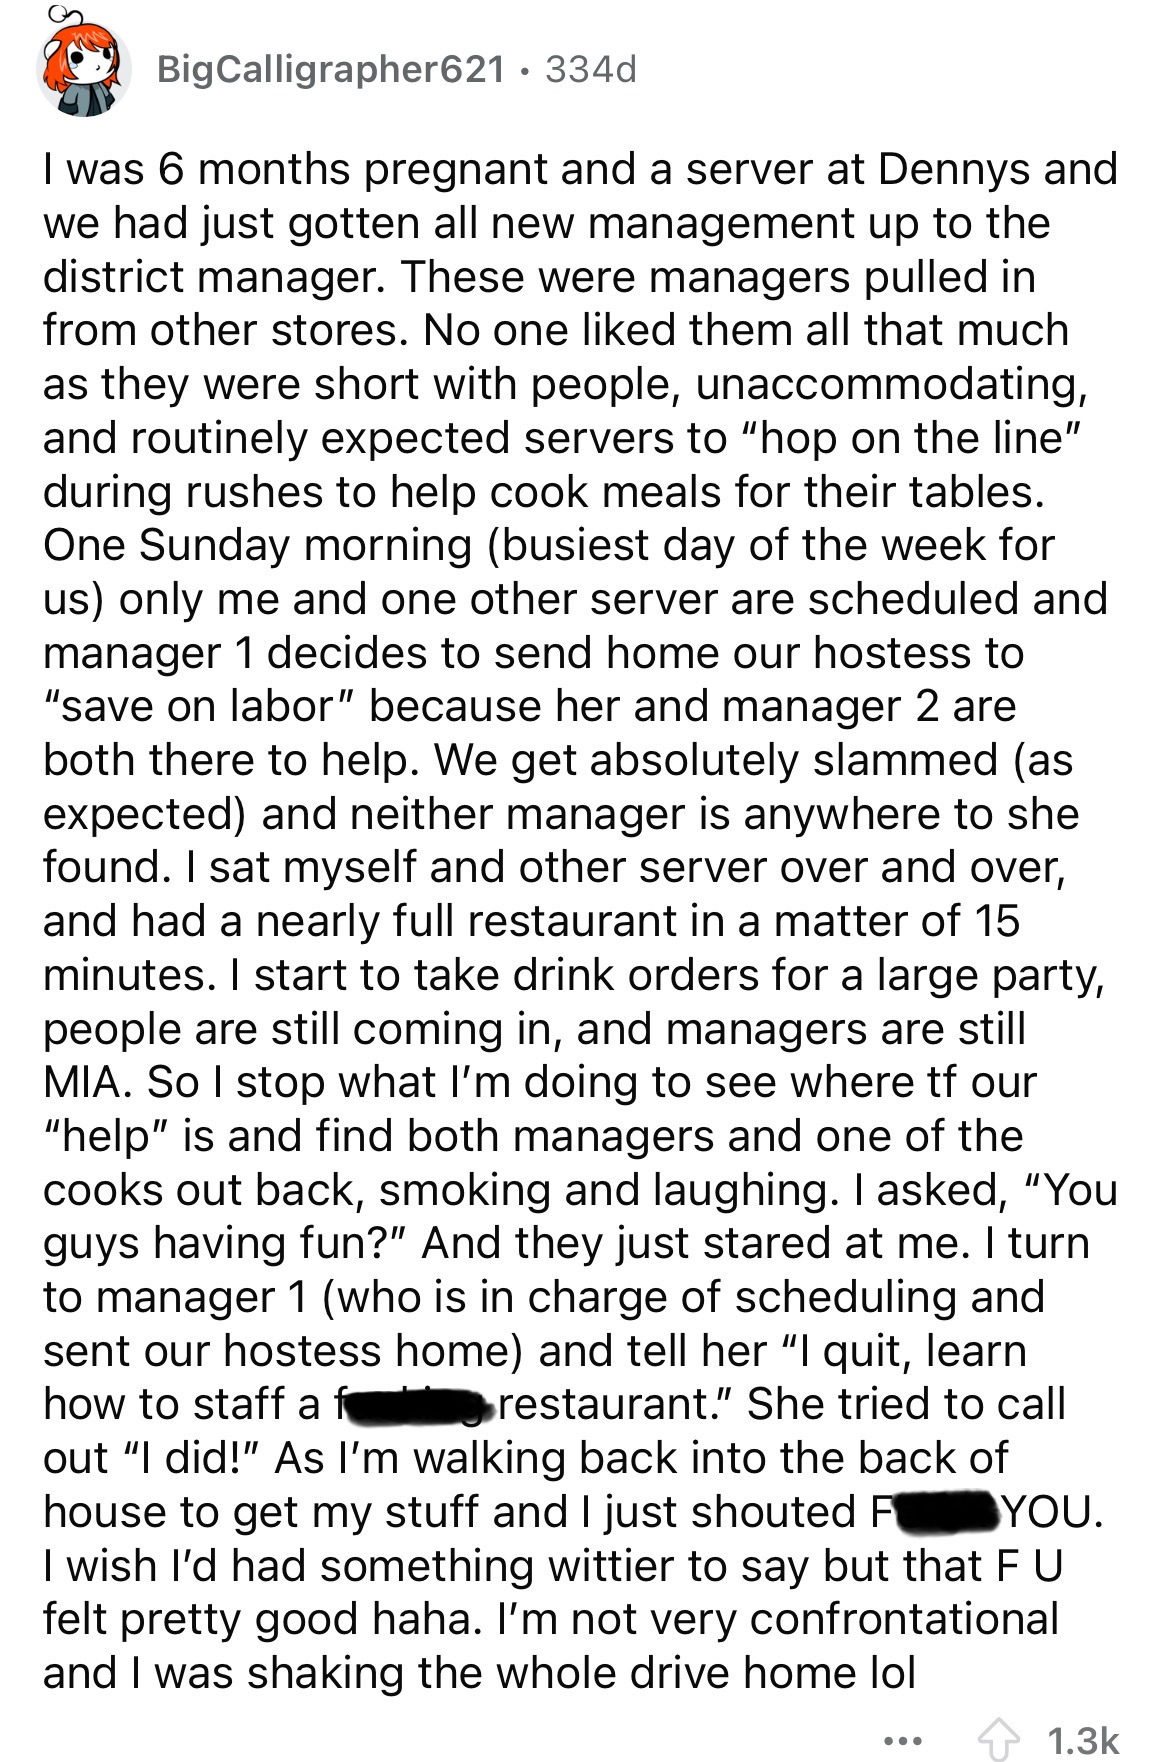 document - BigCalligrapher621 334d I was 6 months pregnant and a server at Dennys and we had just gotten all new management up to the district manager. These were managers pulled in from other stores. No one d them all that much as they were short with pe